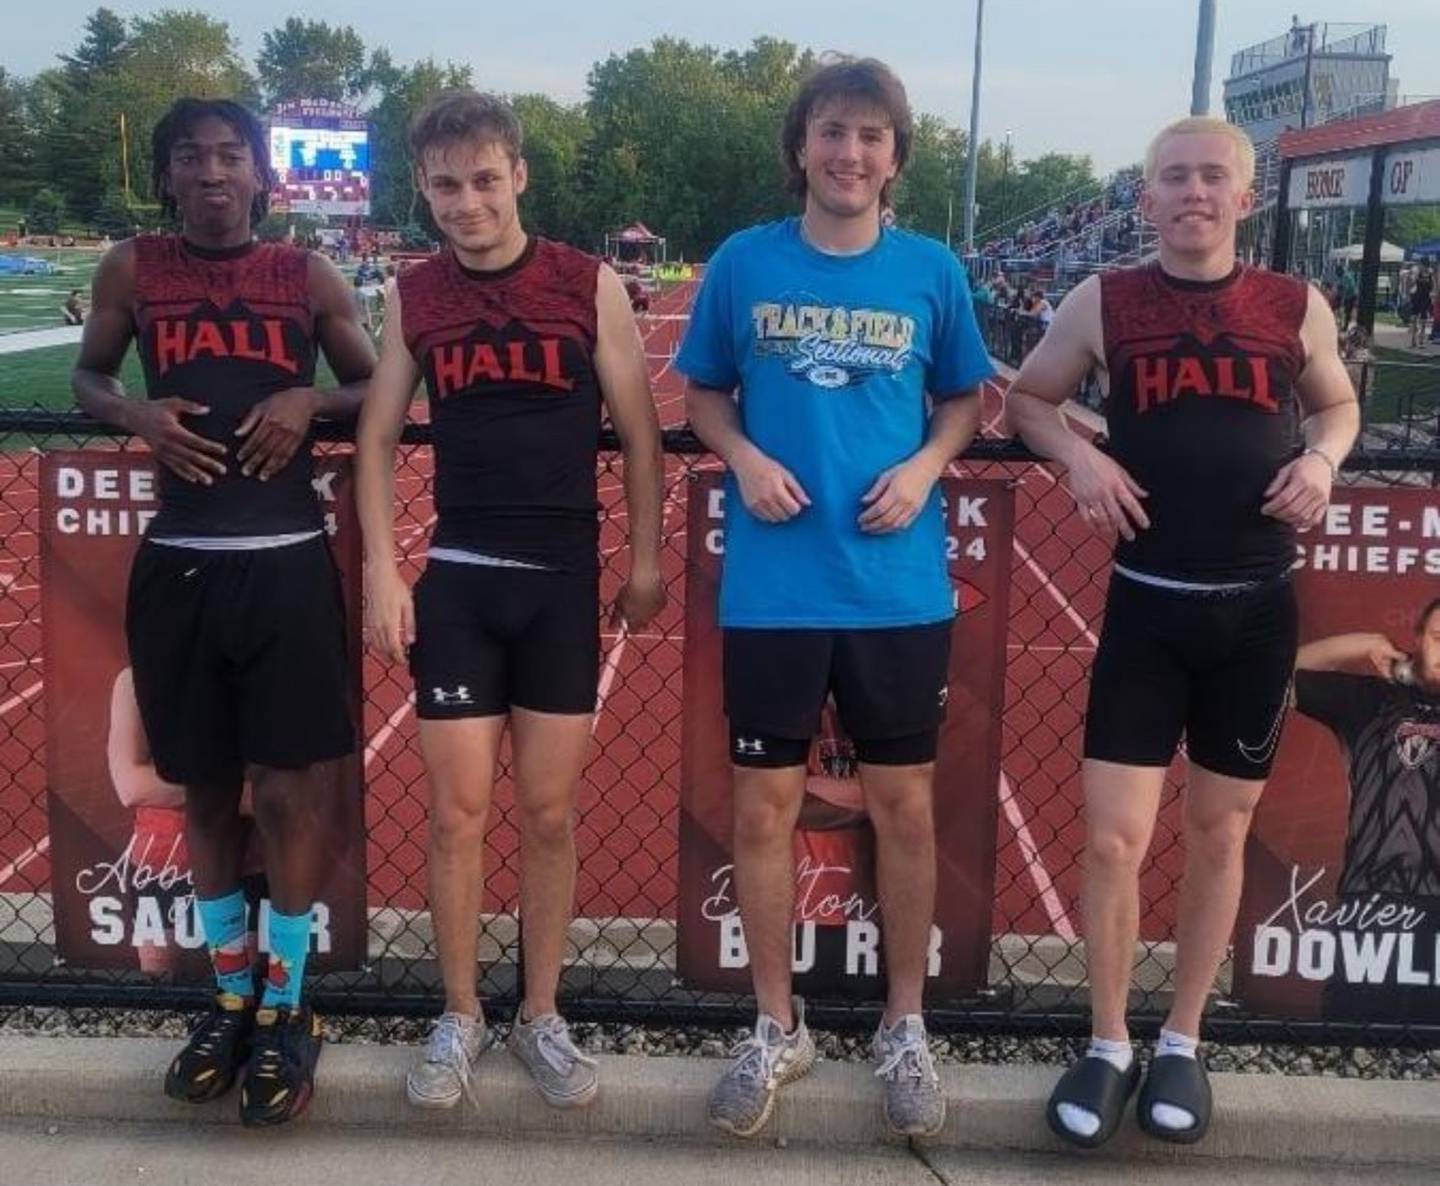 The Hall 4x100 relay of Jeremy Smith, Ryan Bosi, Joseph Bacidore and Caleb Bickett qualified for state with a runner-up finish at the 1A Deer Creek-Mackinaw Sectional and led the BCR Honor Roll with a time of 44.95.